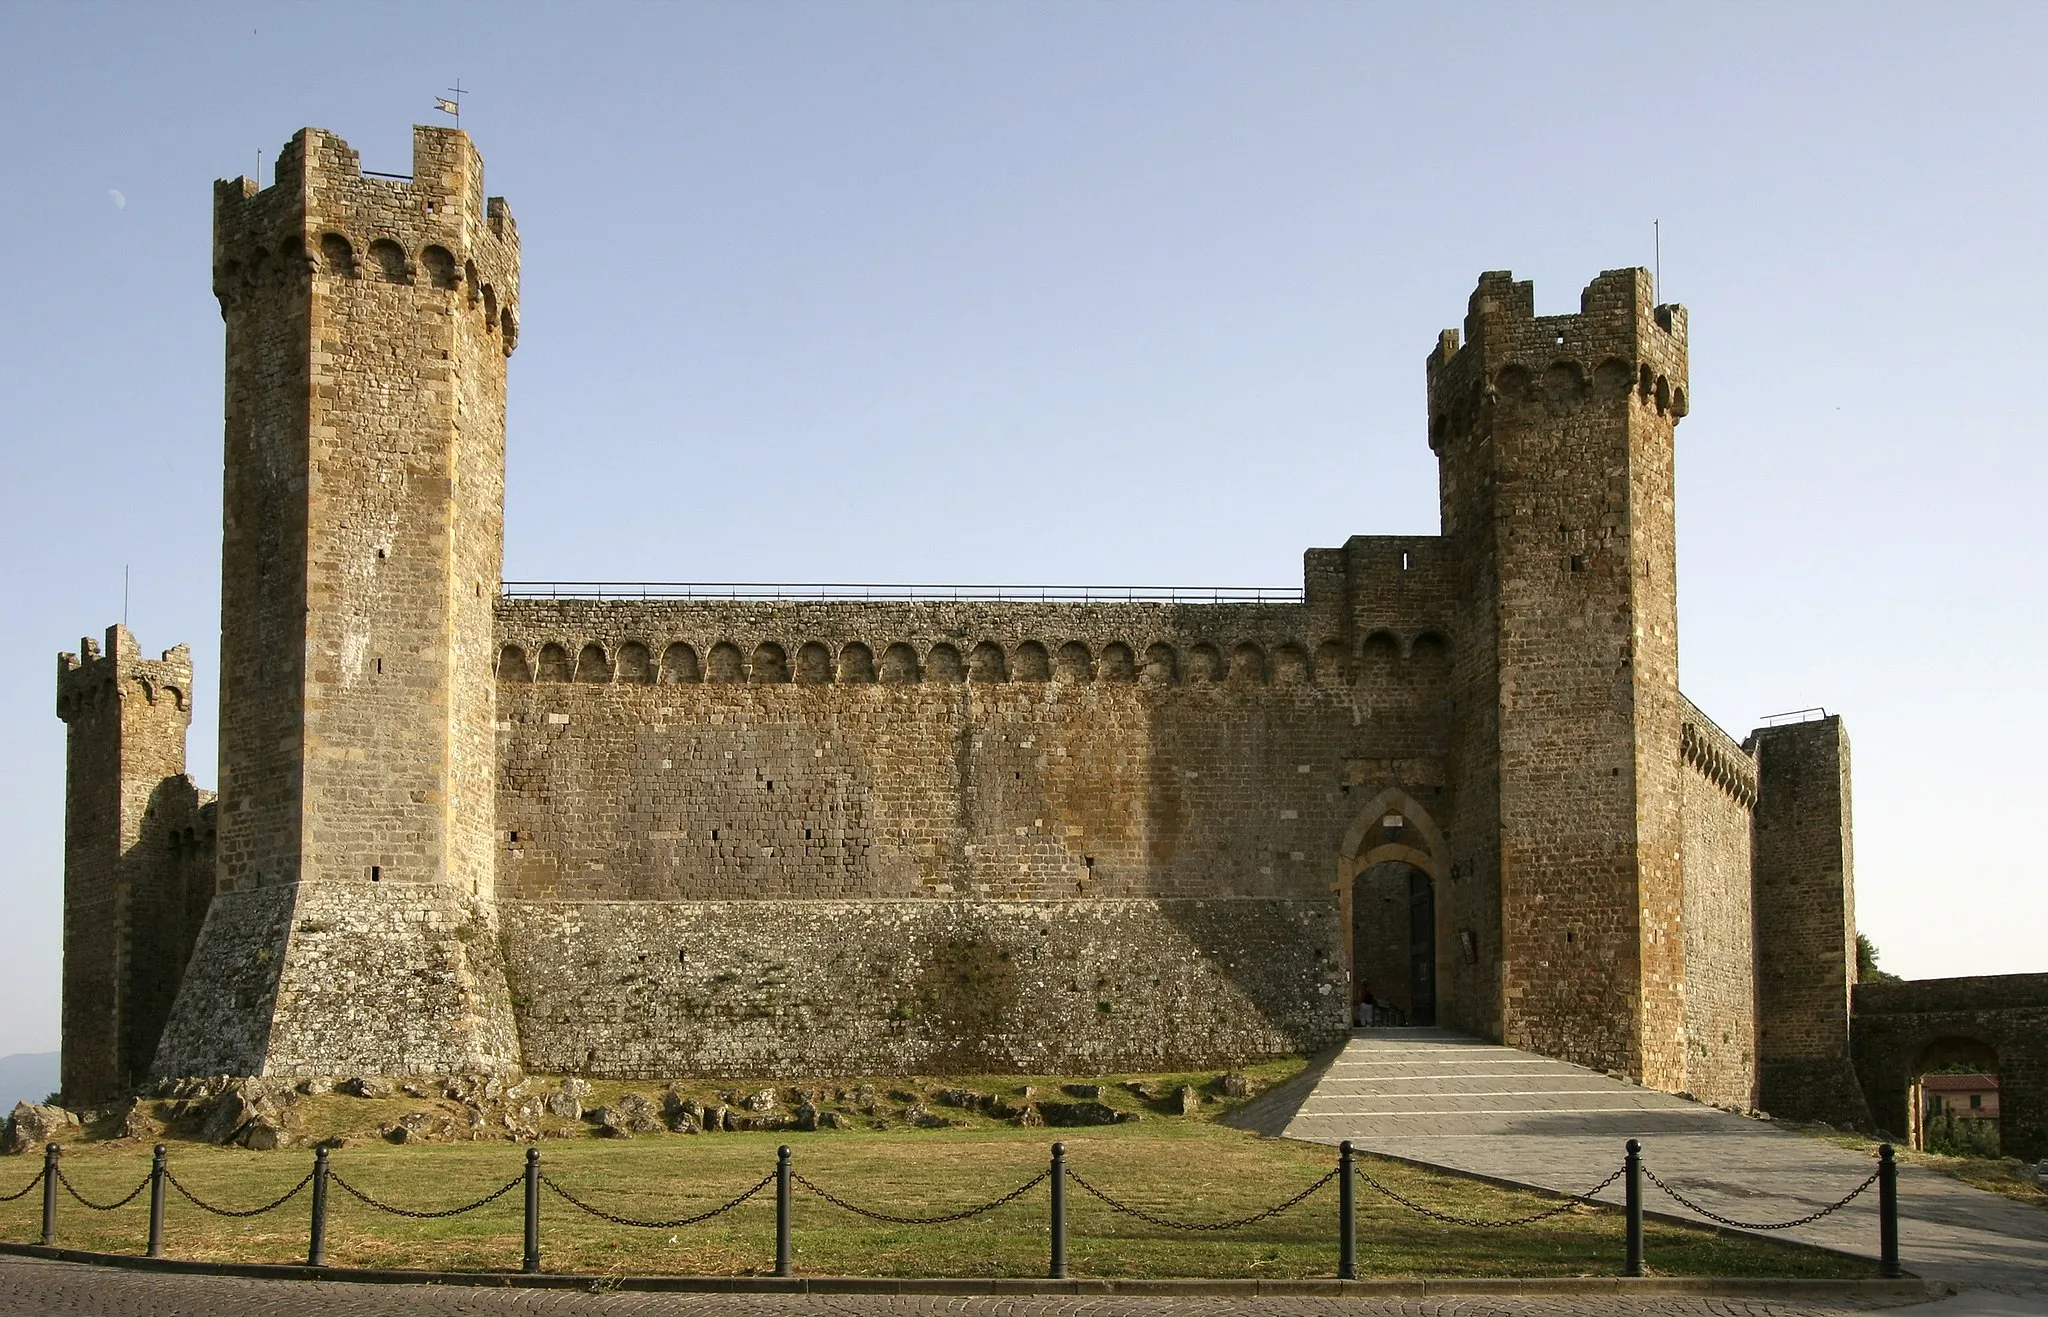 Photo showing: Castle (Fortezza) at Montalcino, Siena, Italy. Photo taken by Type17, 18:50hrs June 24th 2007